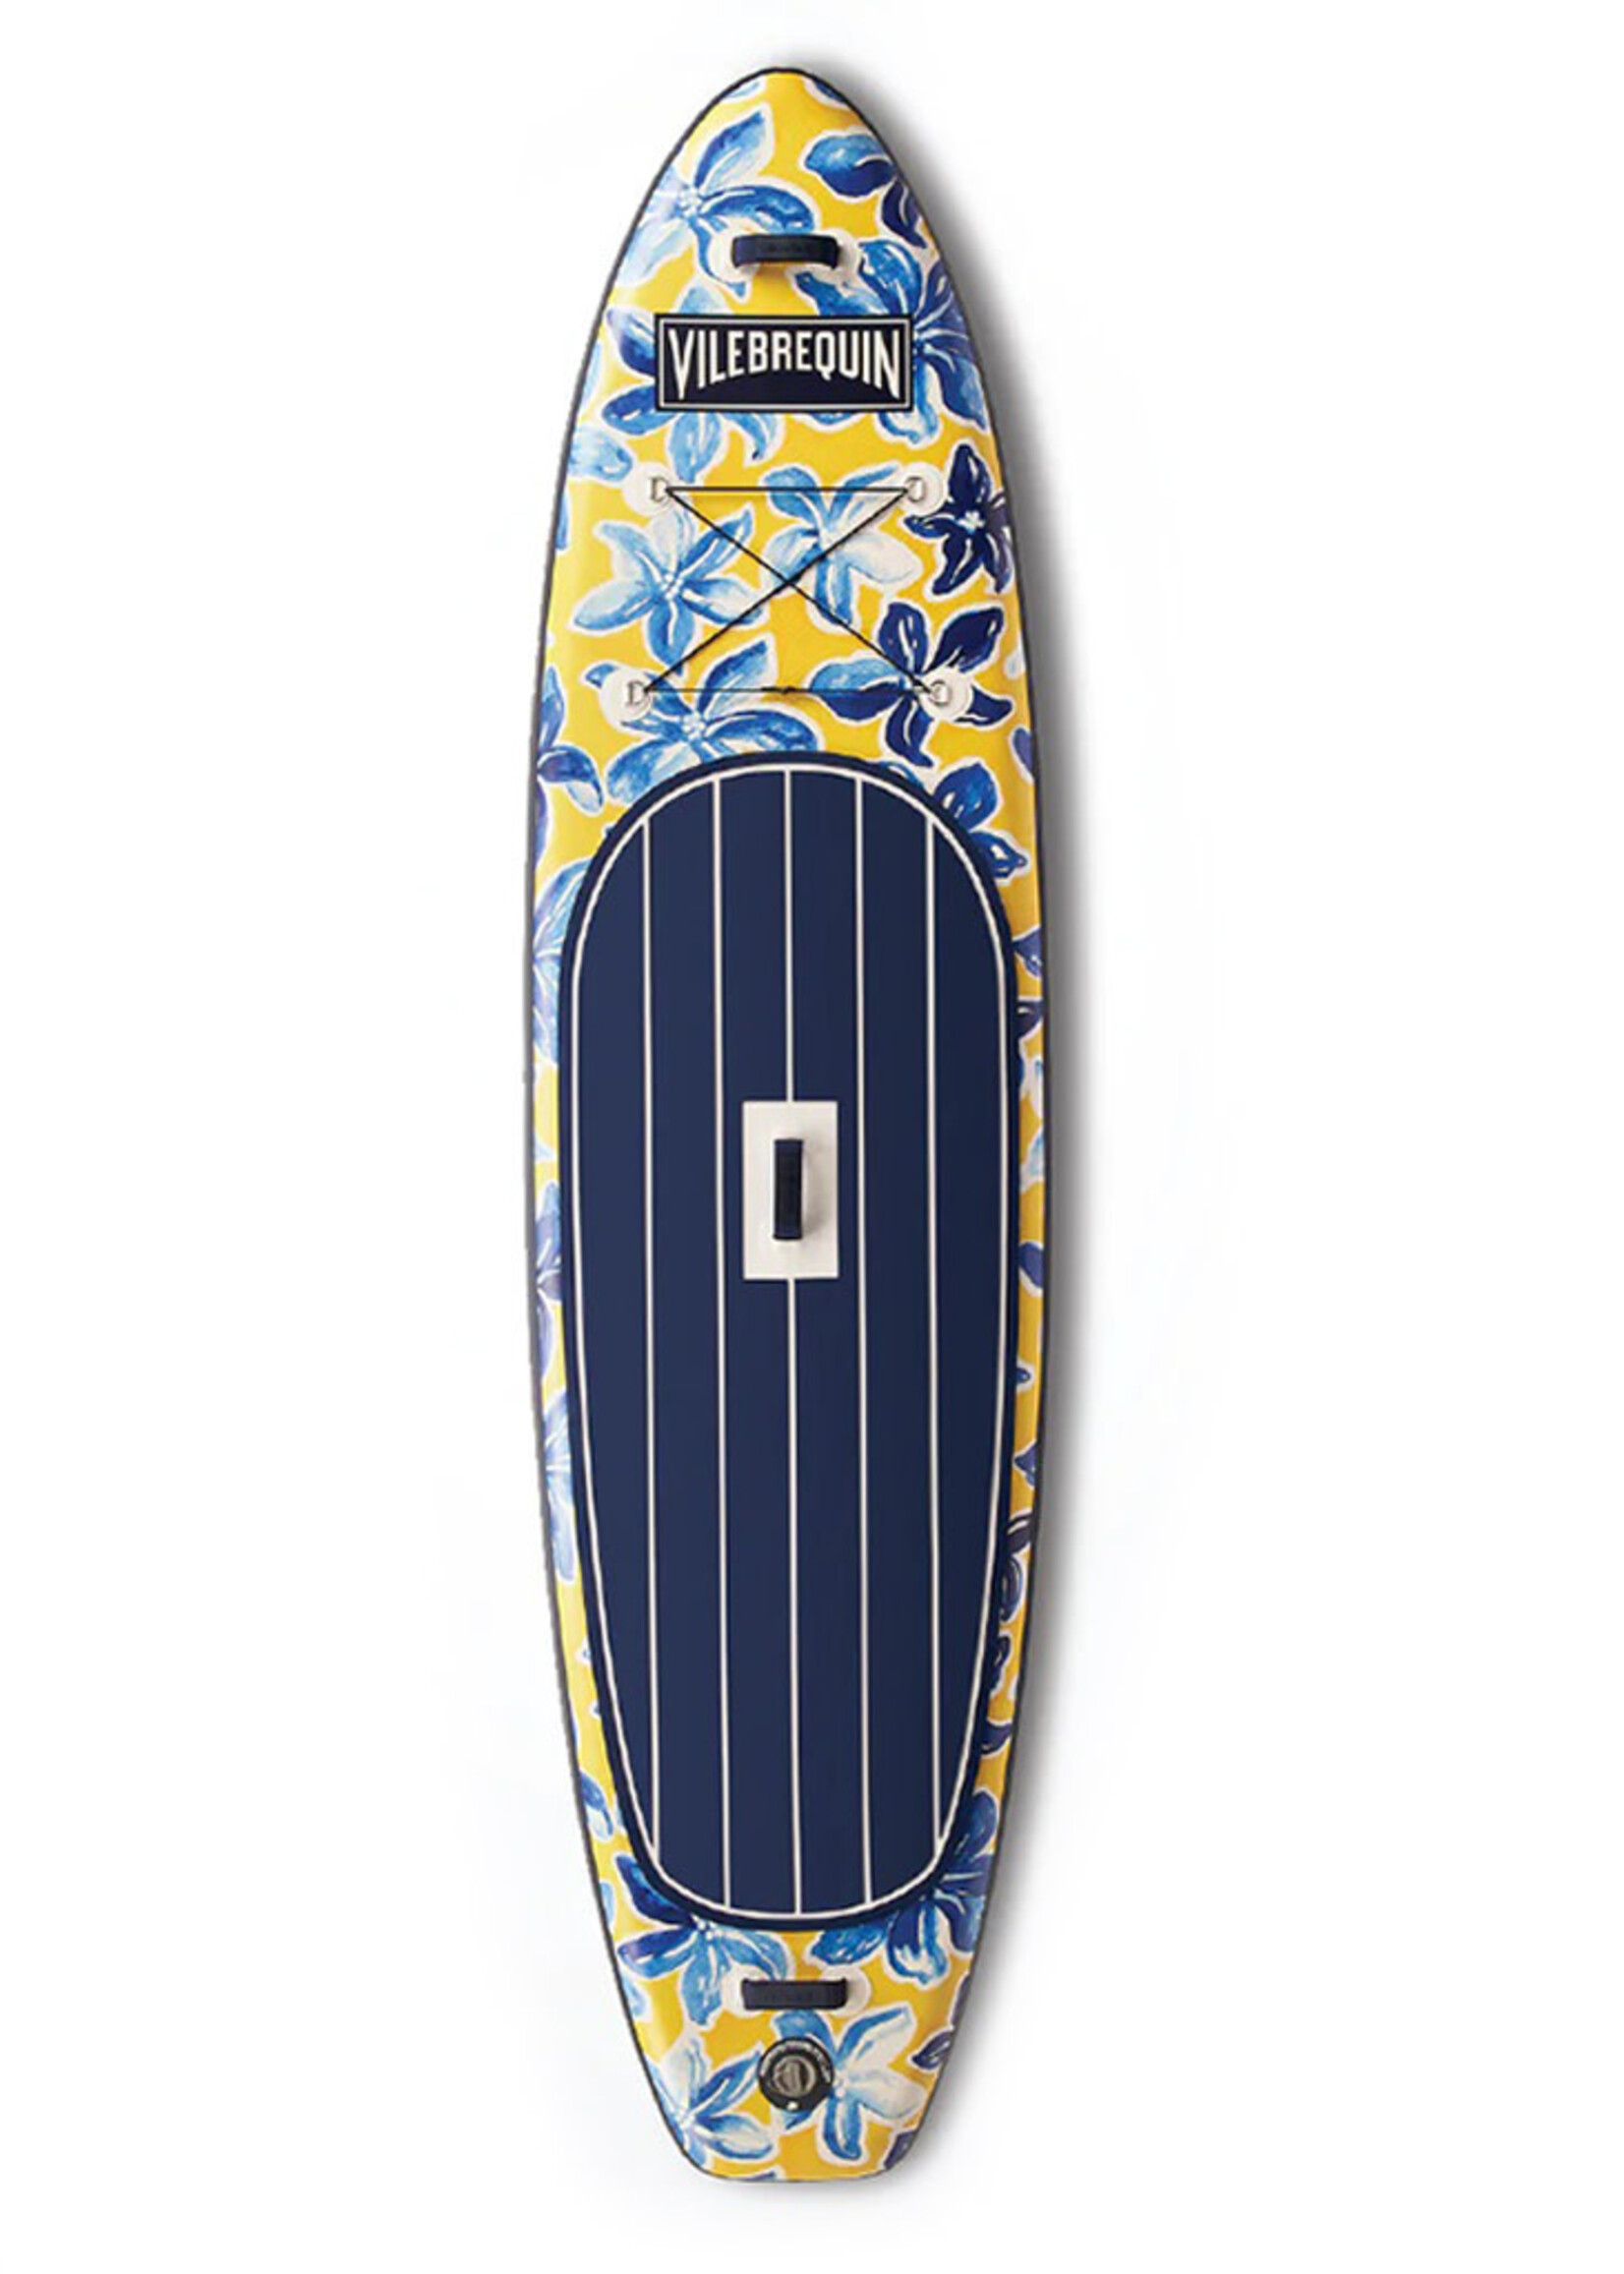 beaulake "Limited Edition Vilebrequin" 10'6"Inflatable SUP